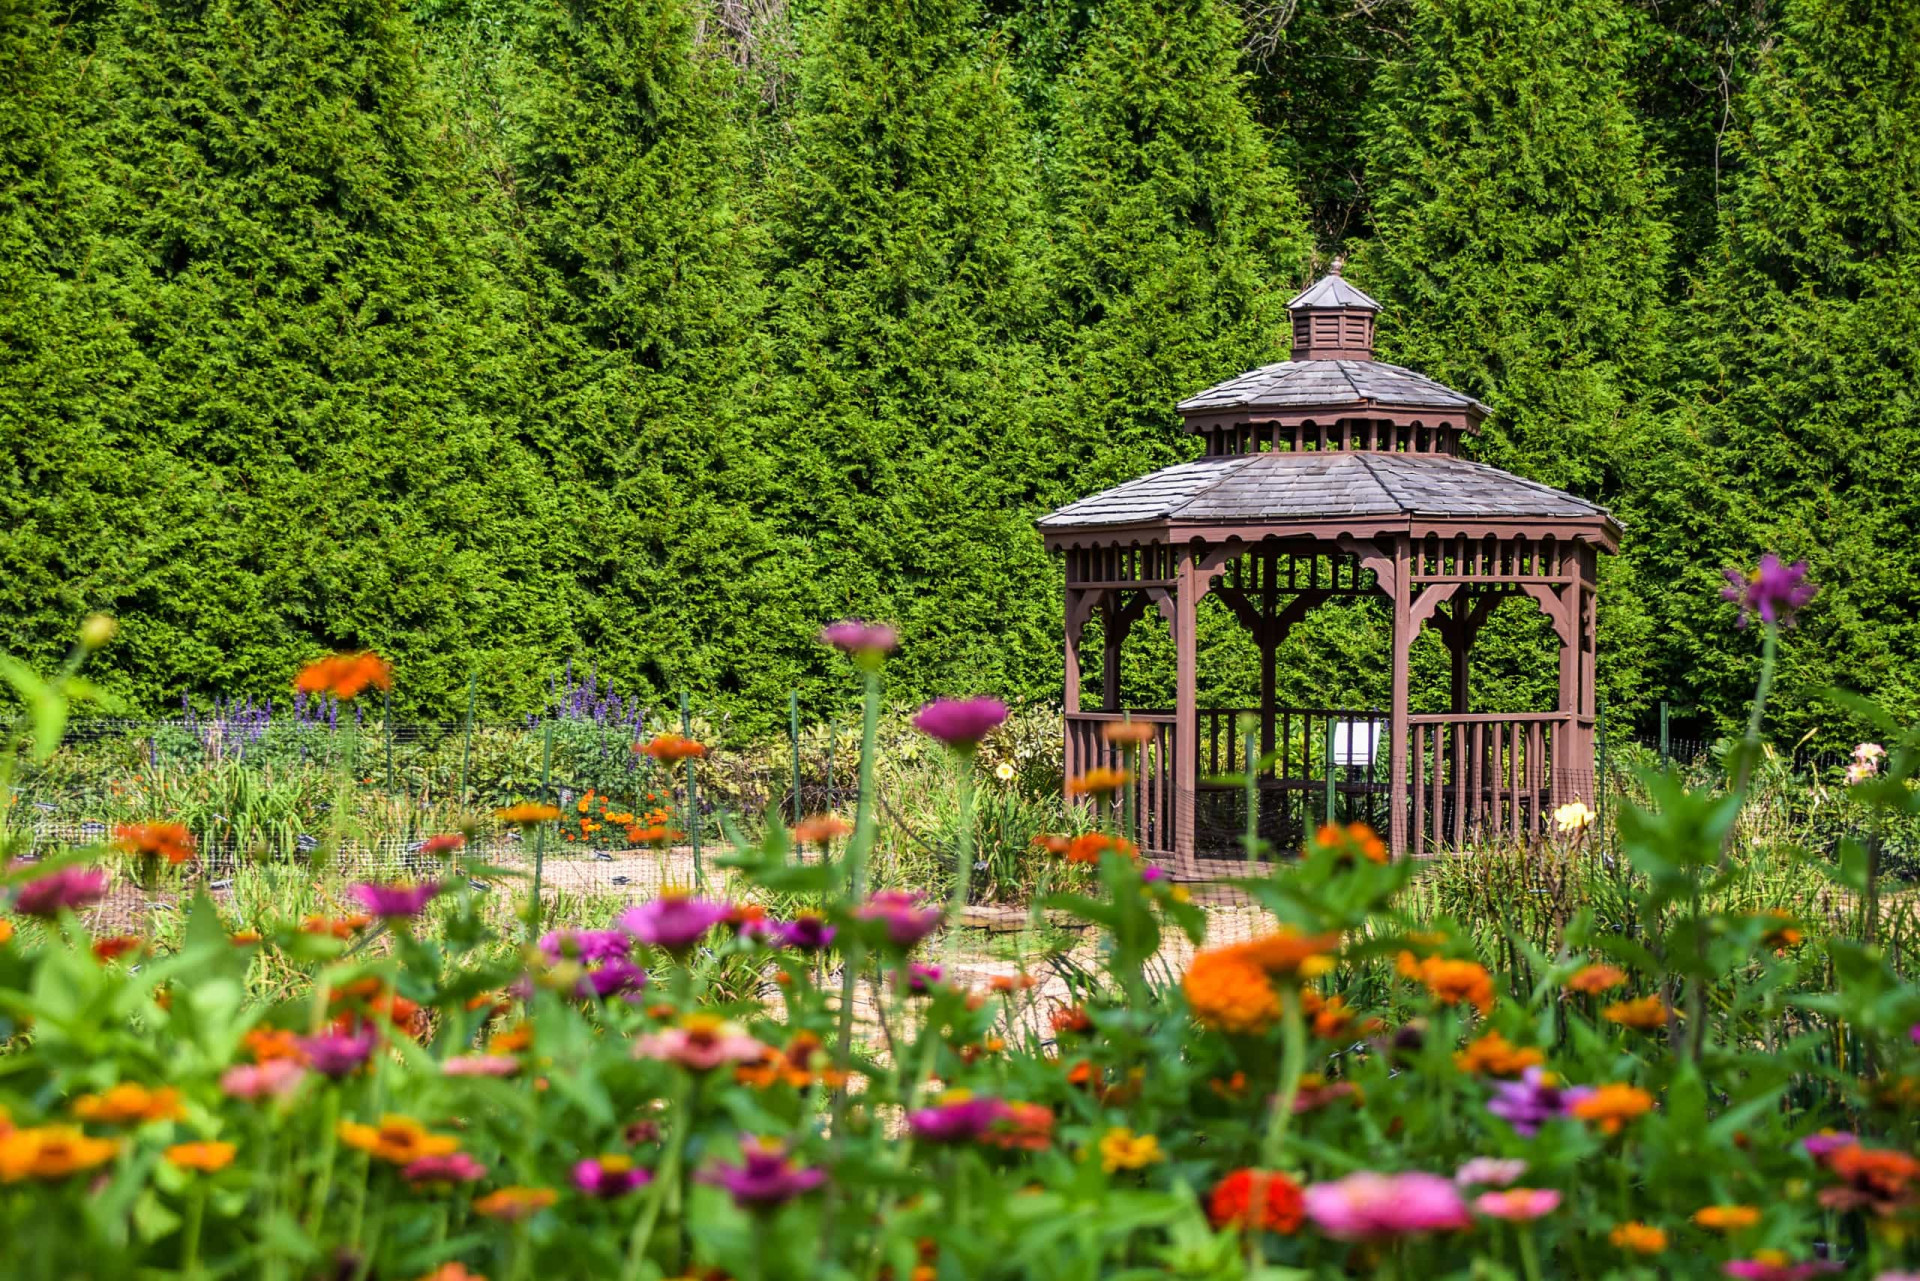 <p>In the scenic city of Springfield, southwestern Missouri, the Nathanael Green Memorial Park attracts hordes of green-thumbed visitors. Here you'll find dozens of themed gardens, as well as a butterfly house and a myriad of walking trails.</p><p>You may also like:<a href="https://www.starsinsider.com/n/433459?utm_source=msn.com&utm_medium=display&utm_campaign=referral_description&utm_content=486112v1en-us"> Celebrities who support Donald Trump</a></p>